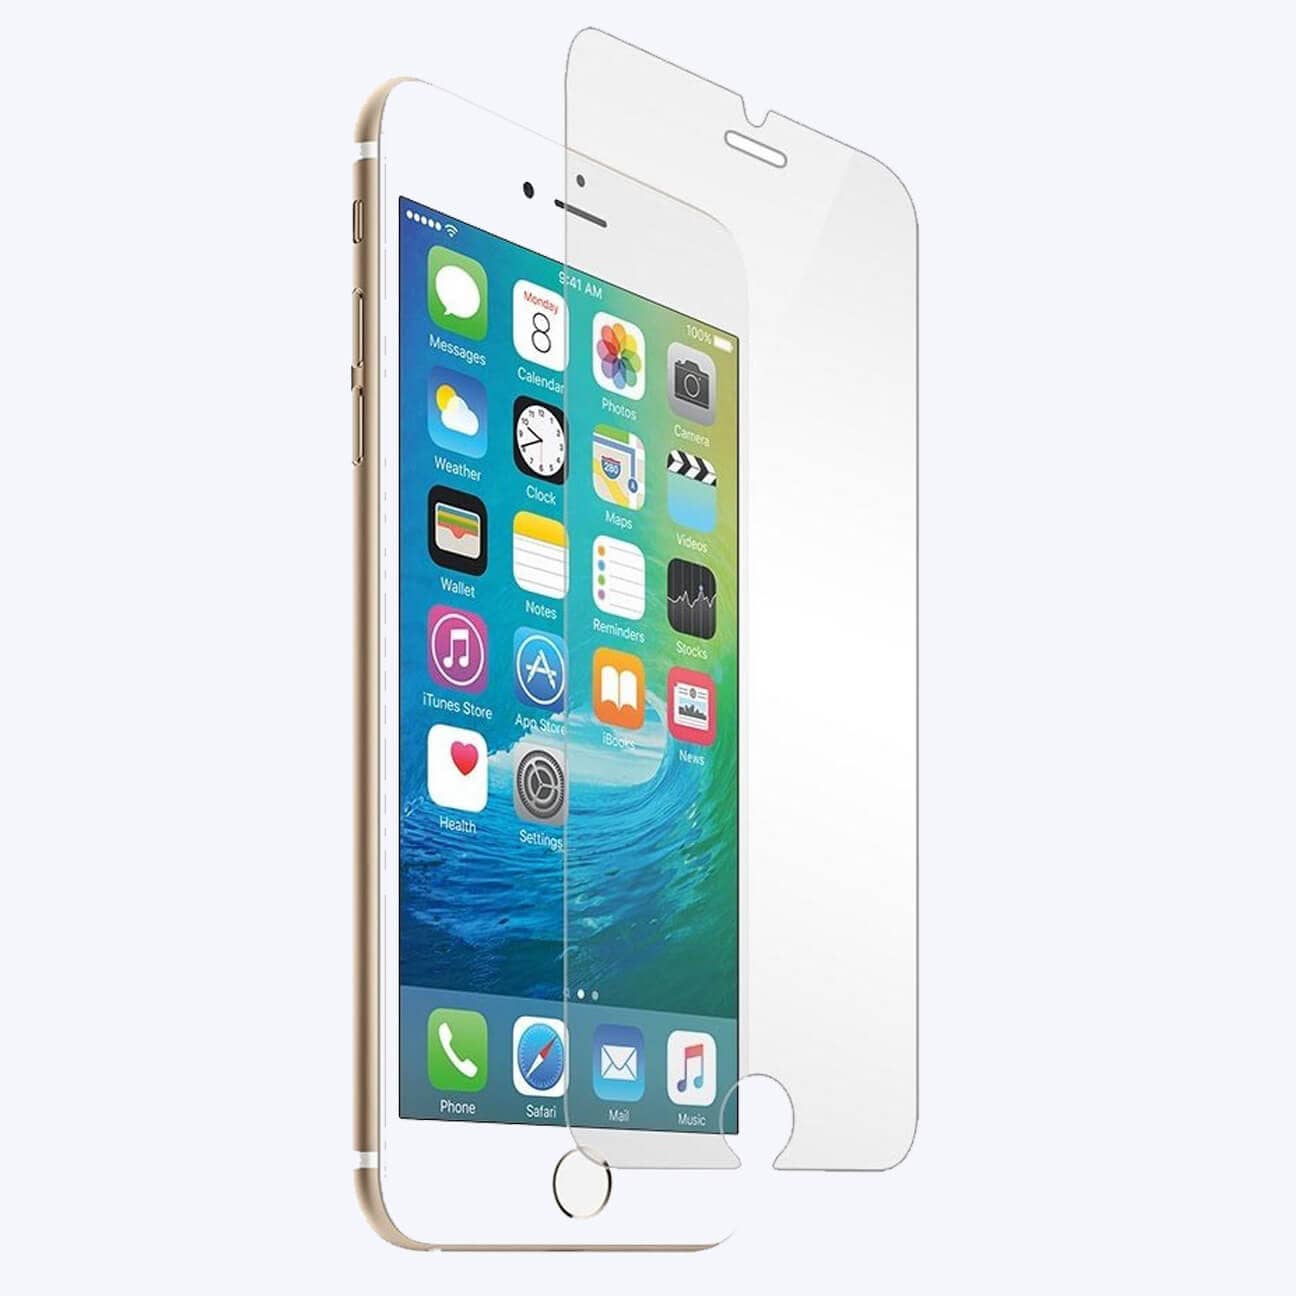 Apple iPhone 5 Tempered Glass Screen Protector